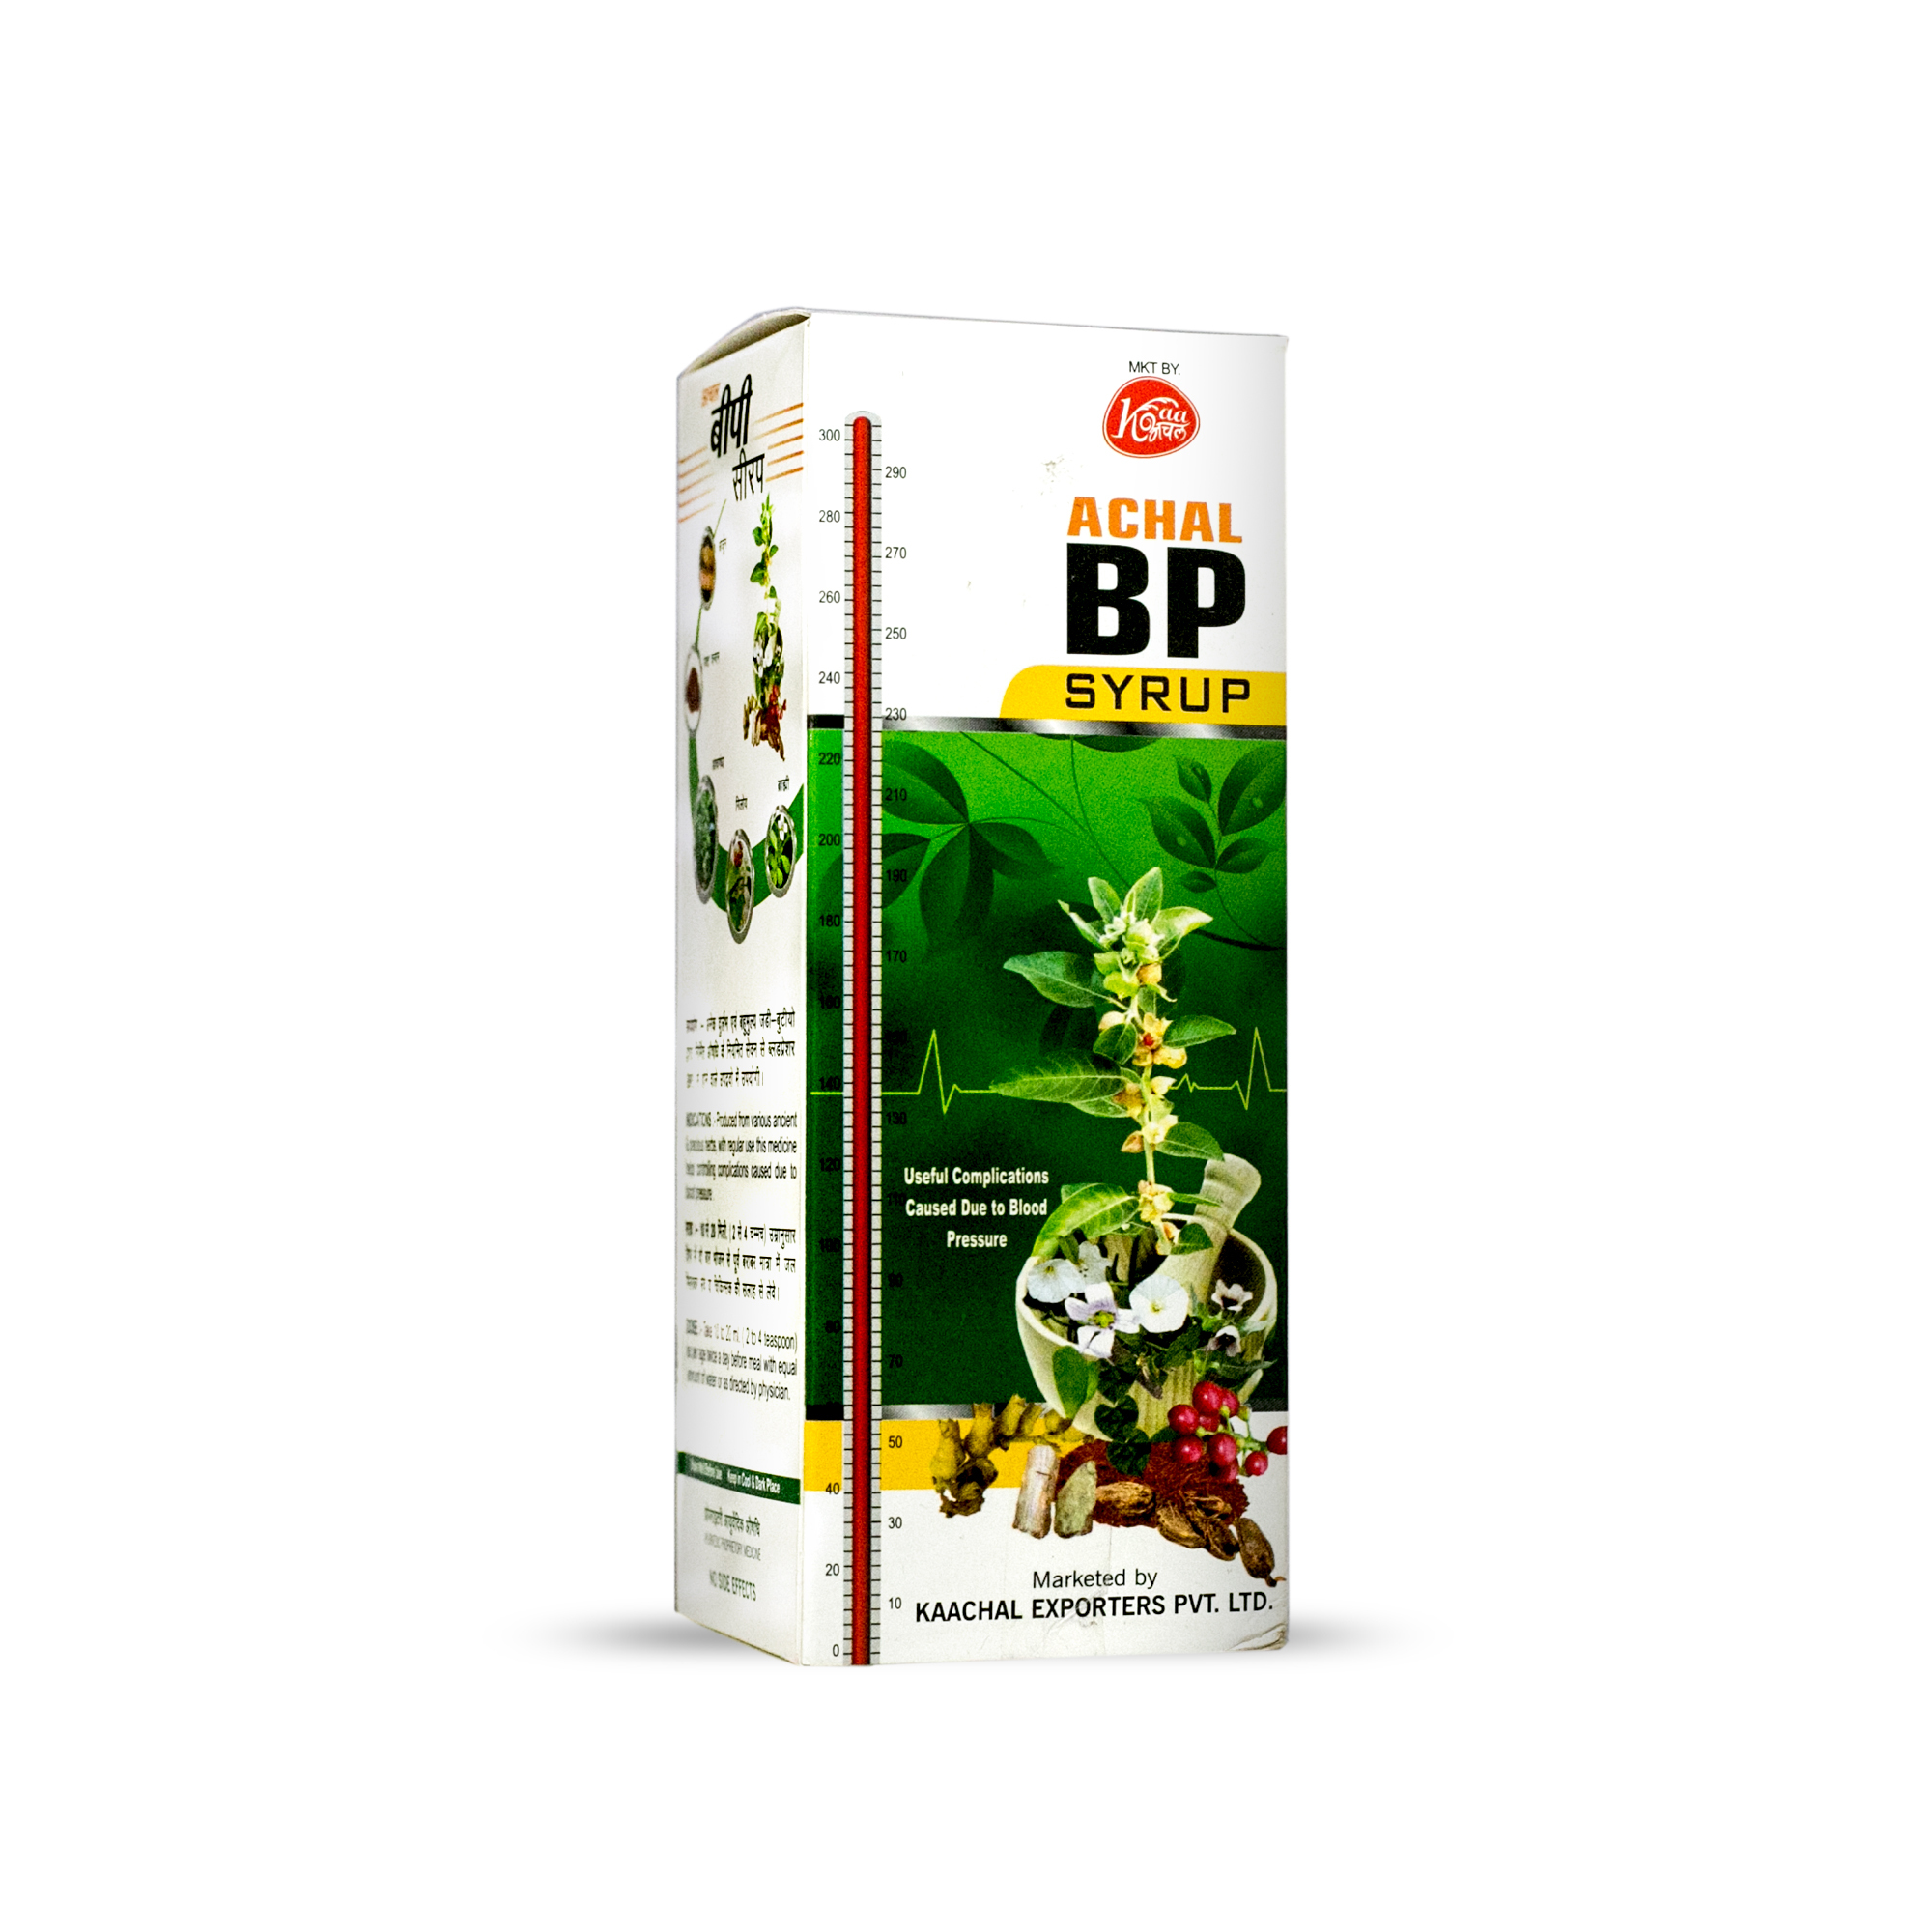 Achal BP Syrup